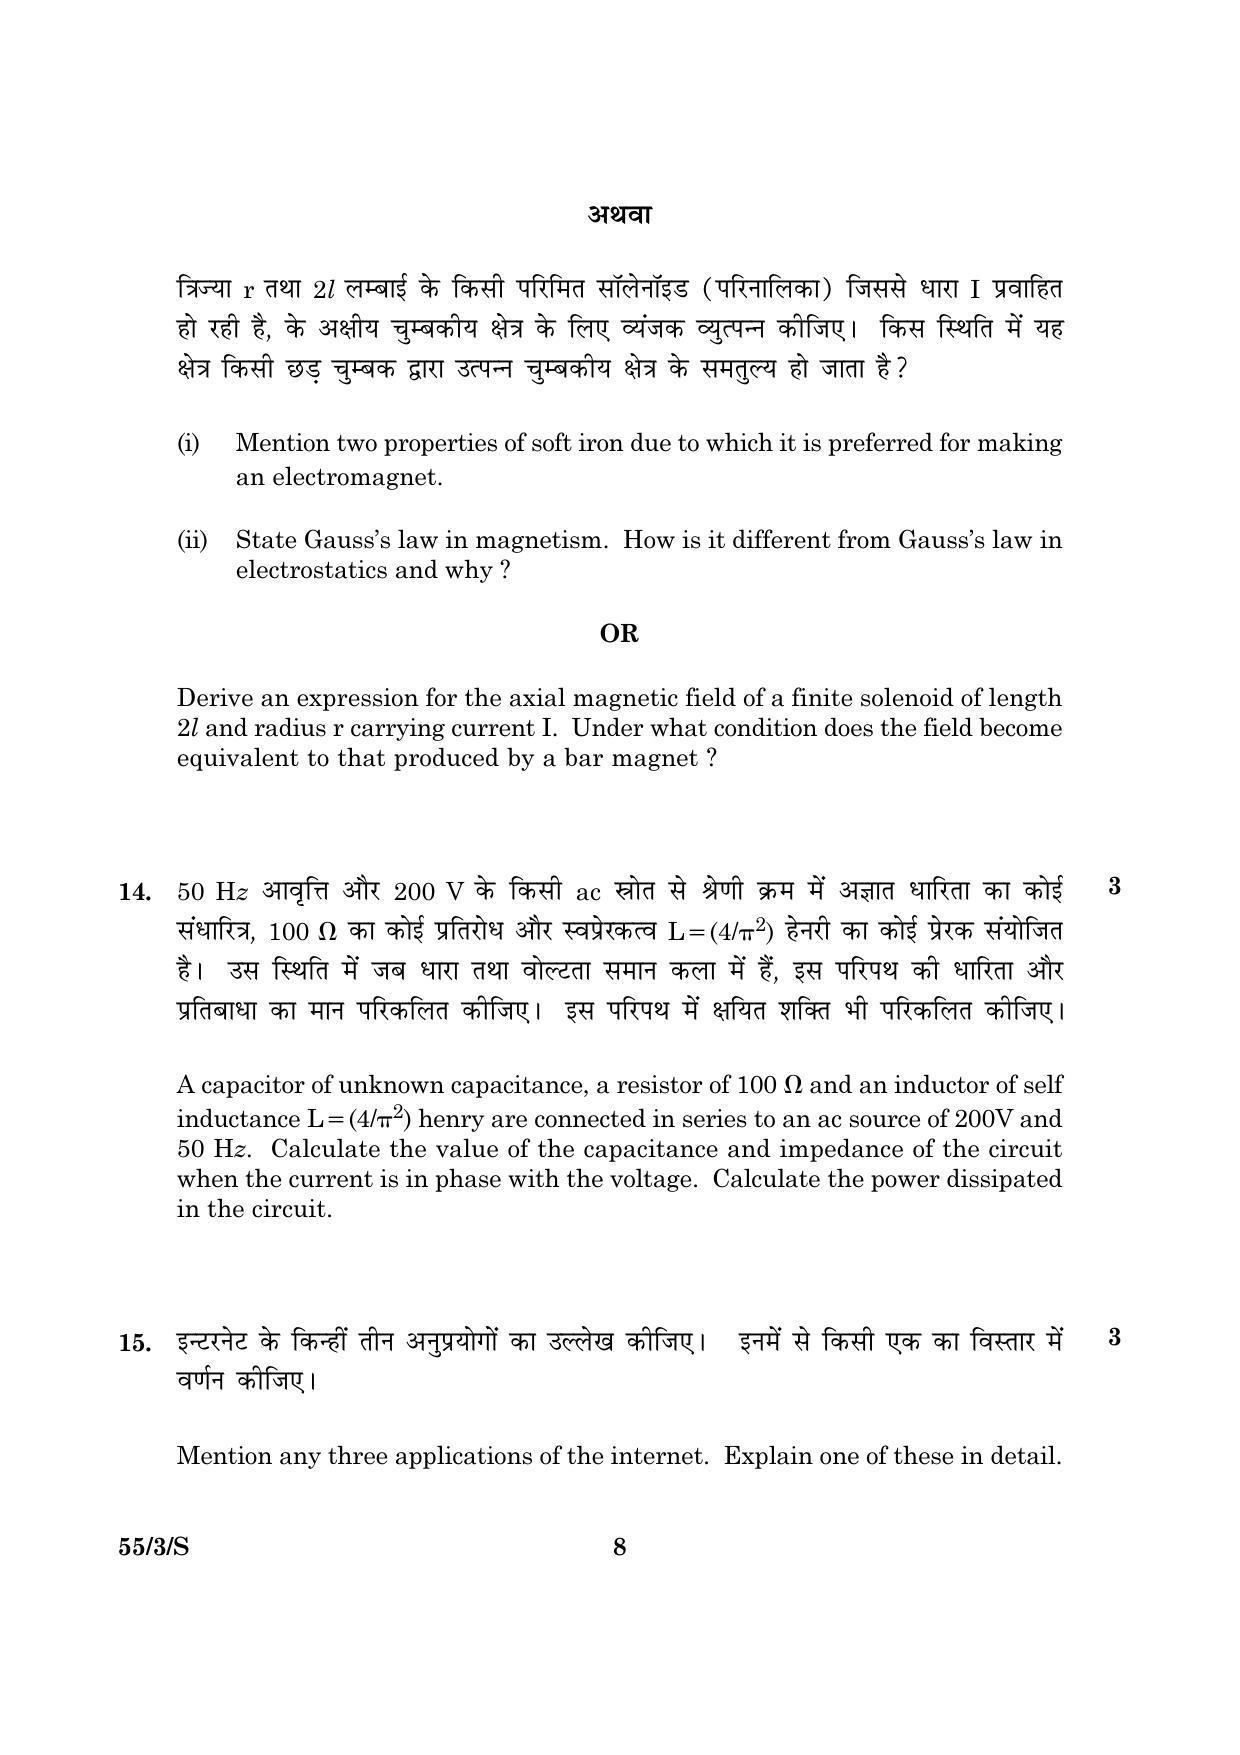 CBSE Class 12 055 Set 3 S Physics Theory 2016 Question Paper - Page 8